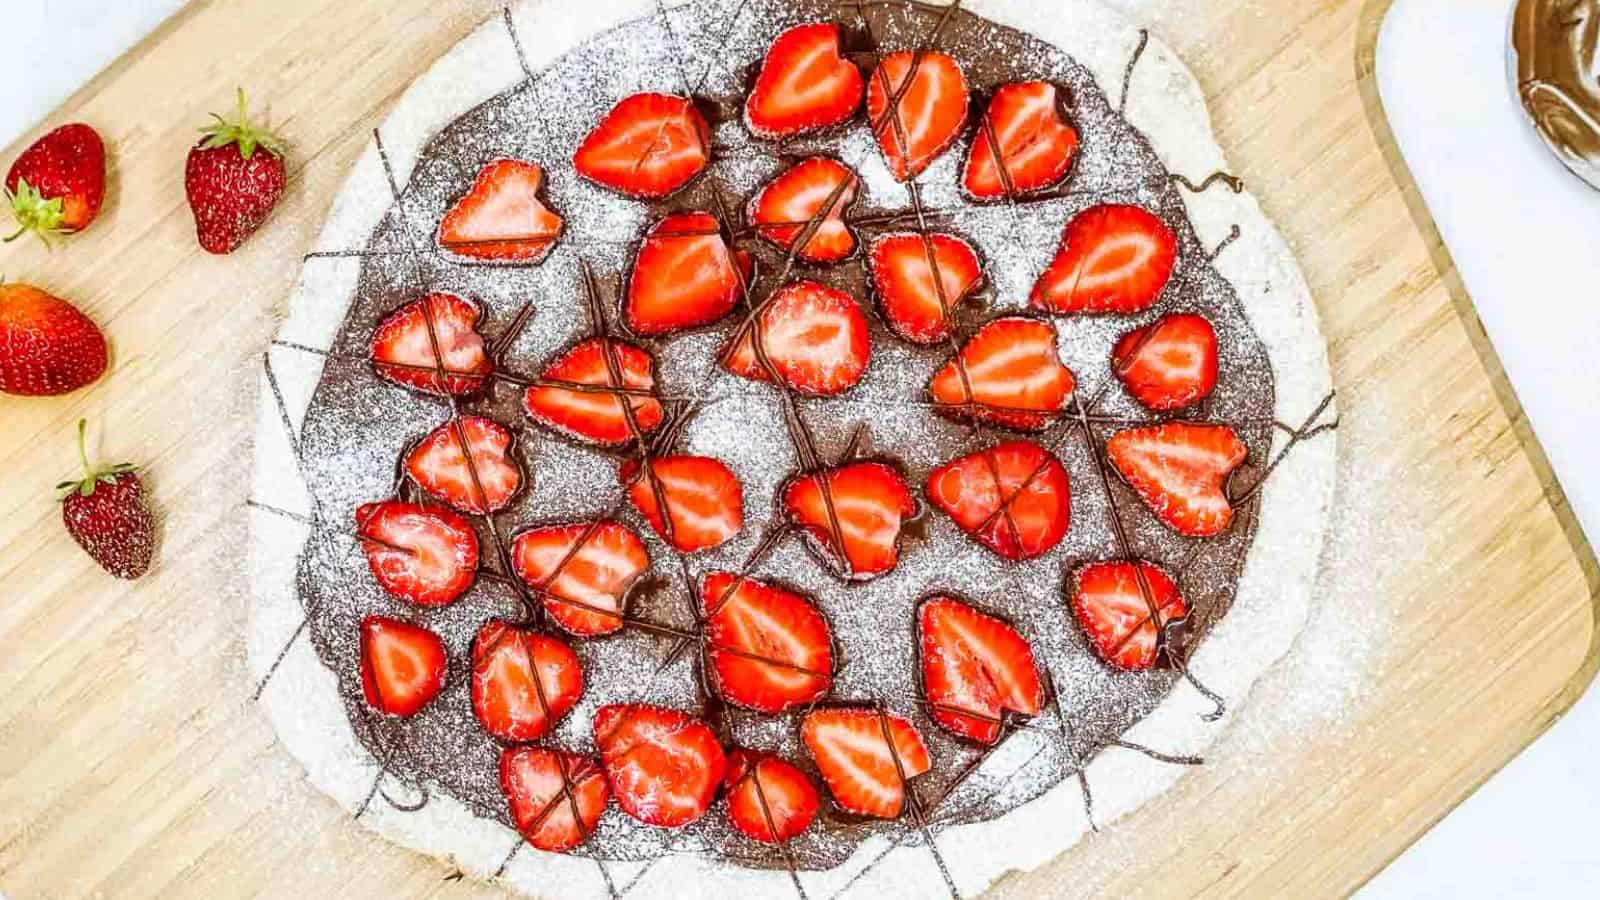 Nutella pizza with strawberries on a pizza board.